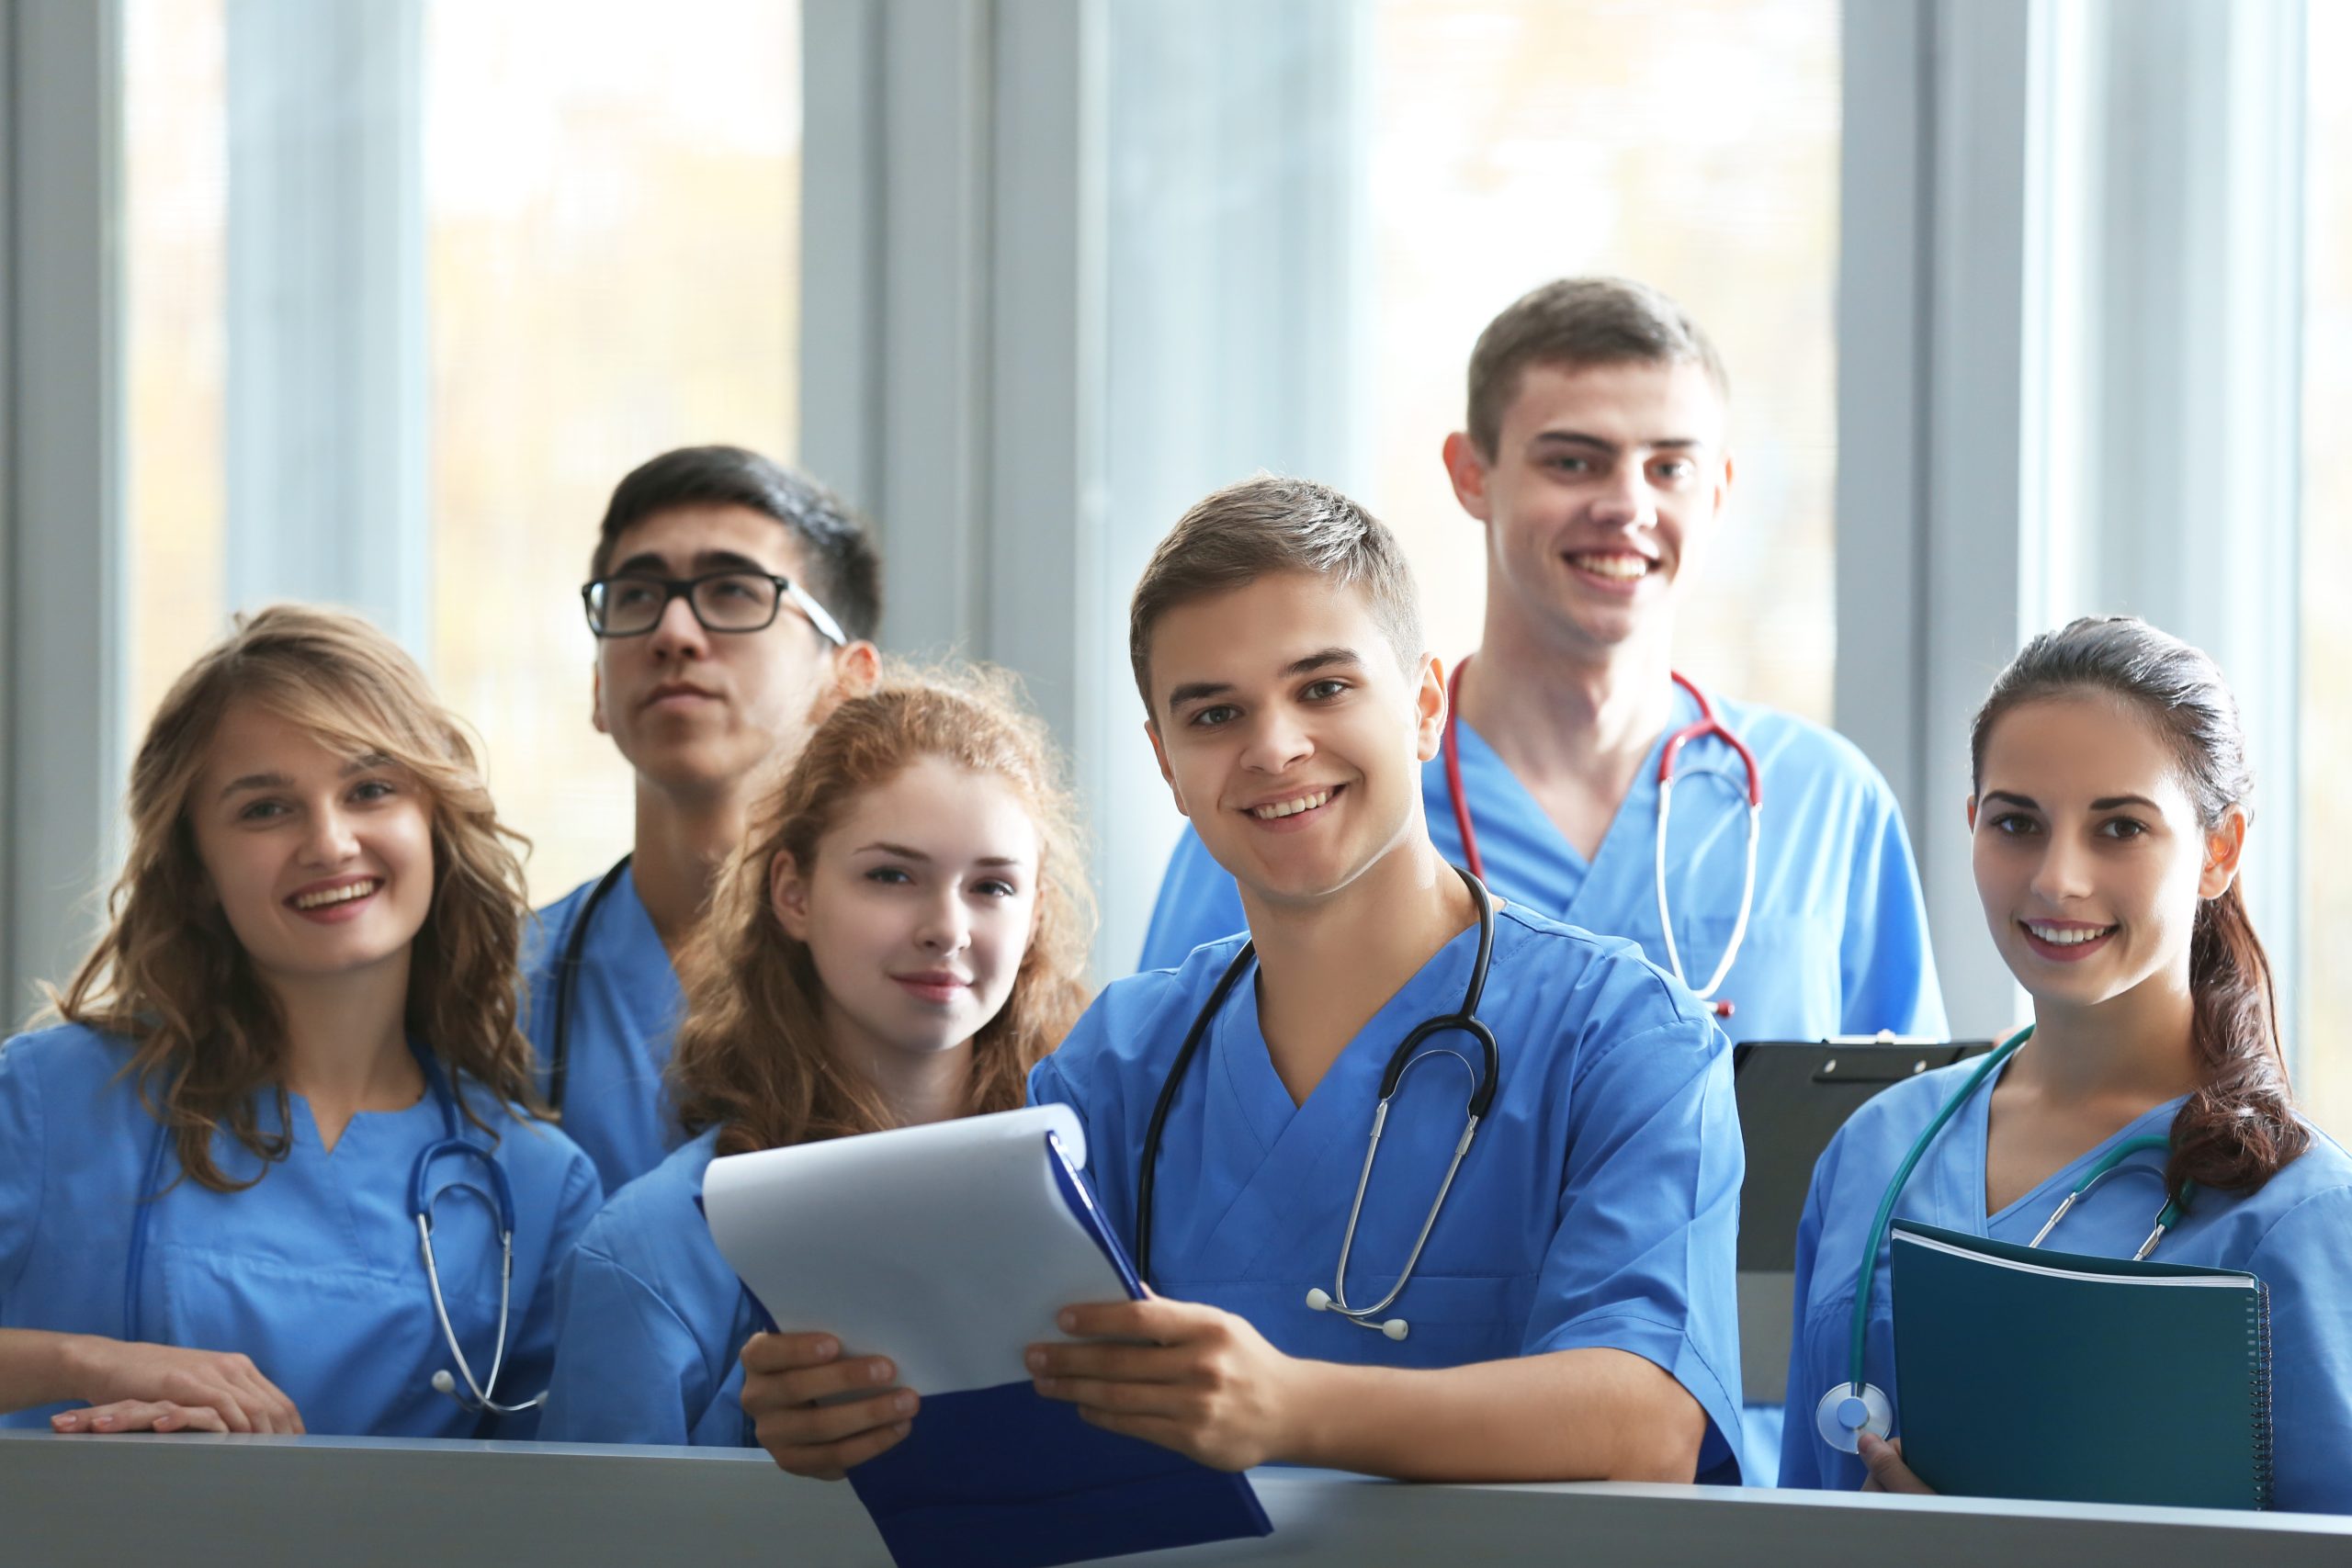 Image of nursing students for our Ultimate Guide to Nursing & Healthcare Degrees and Careers